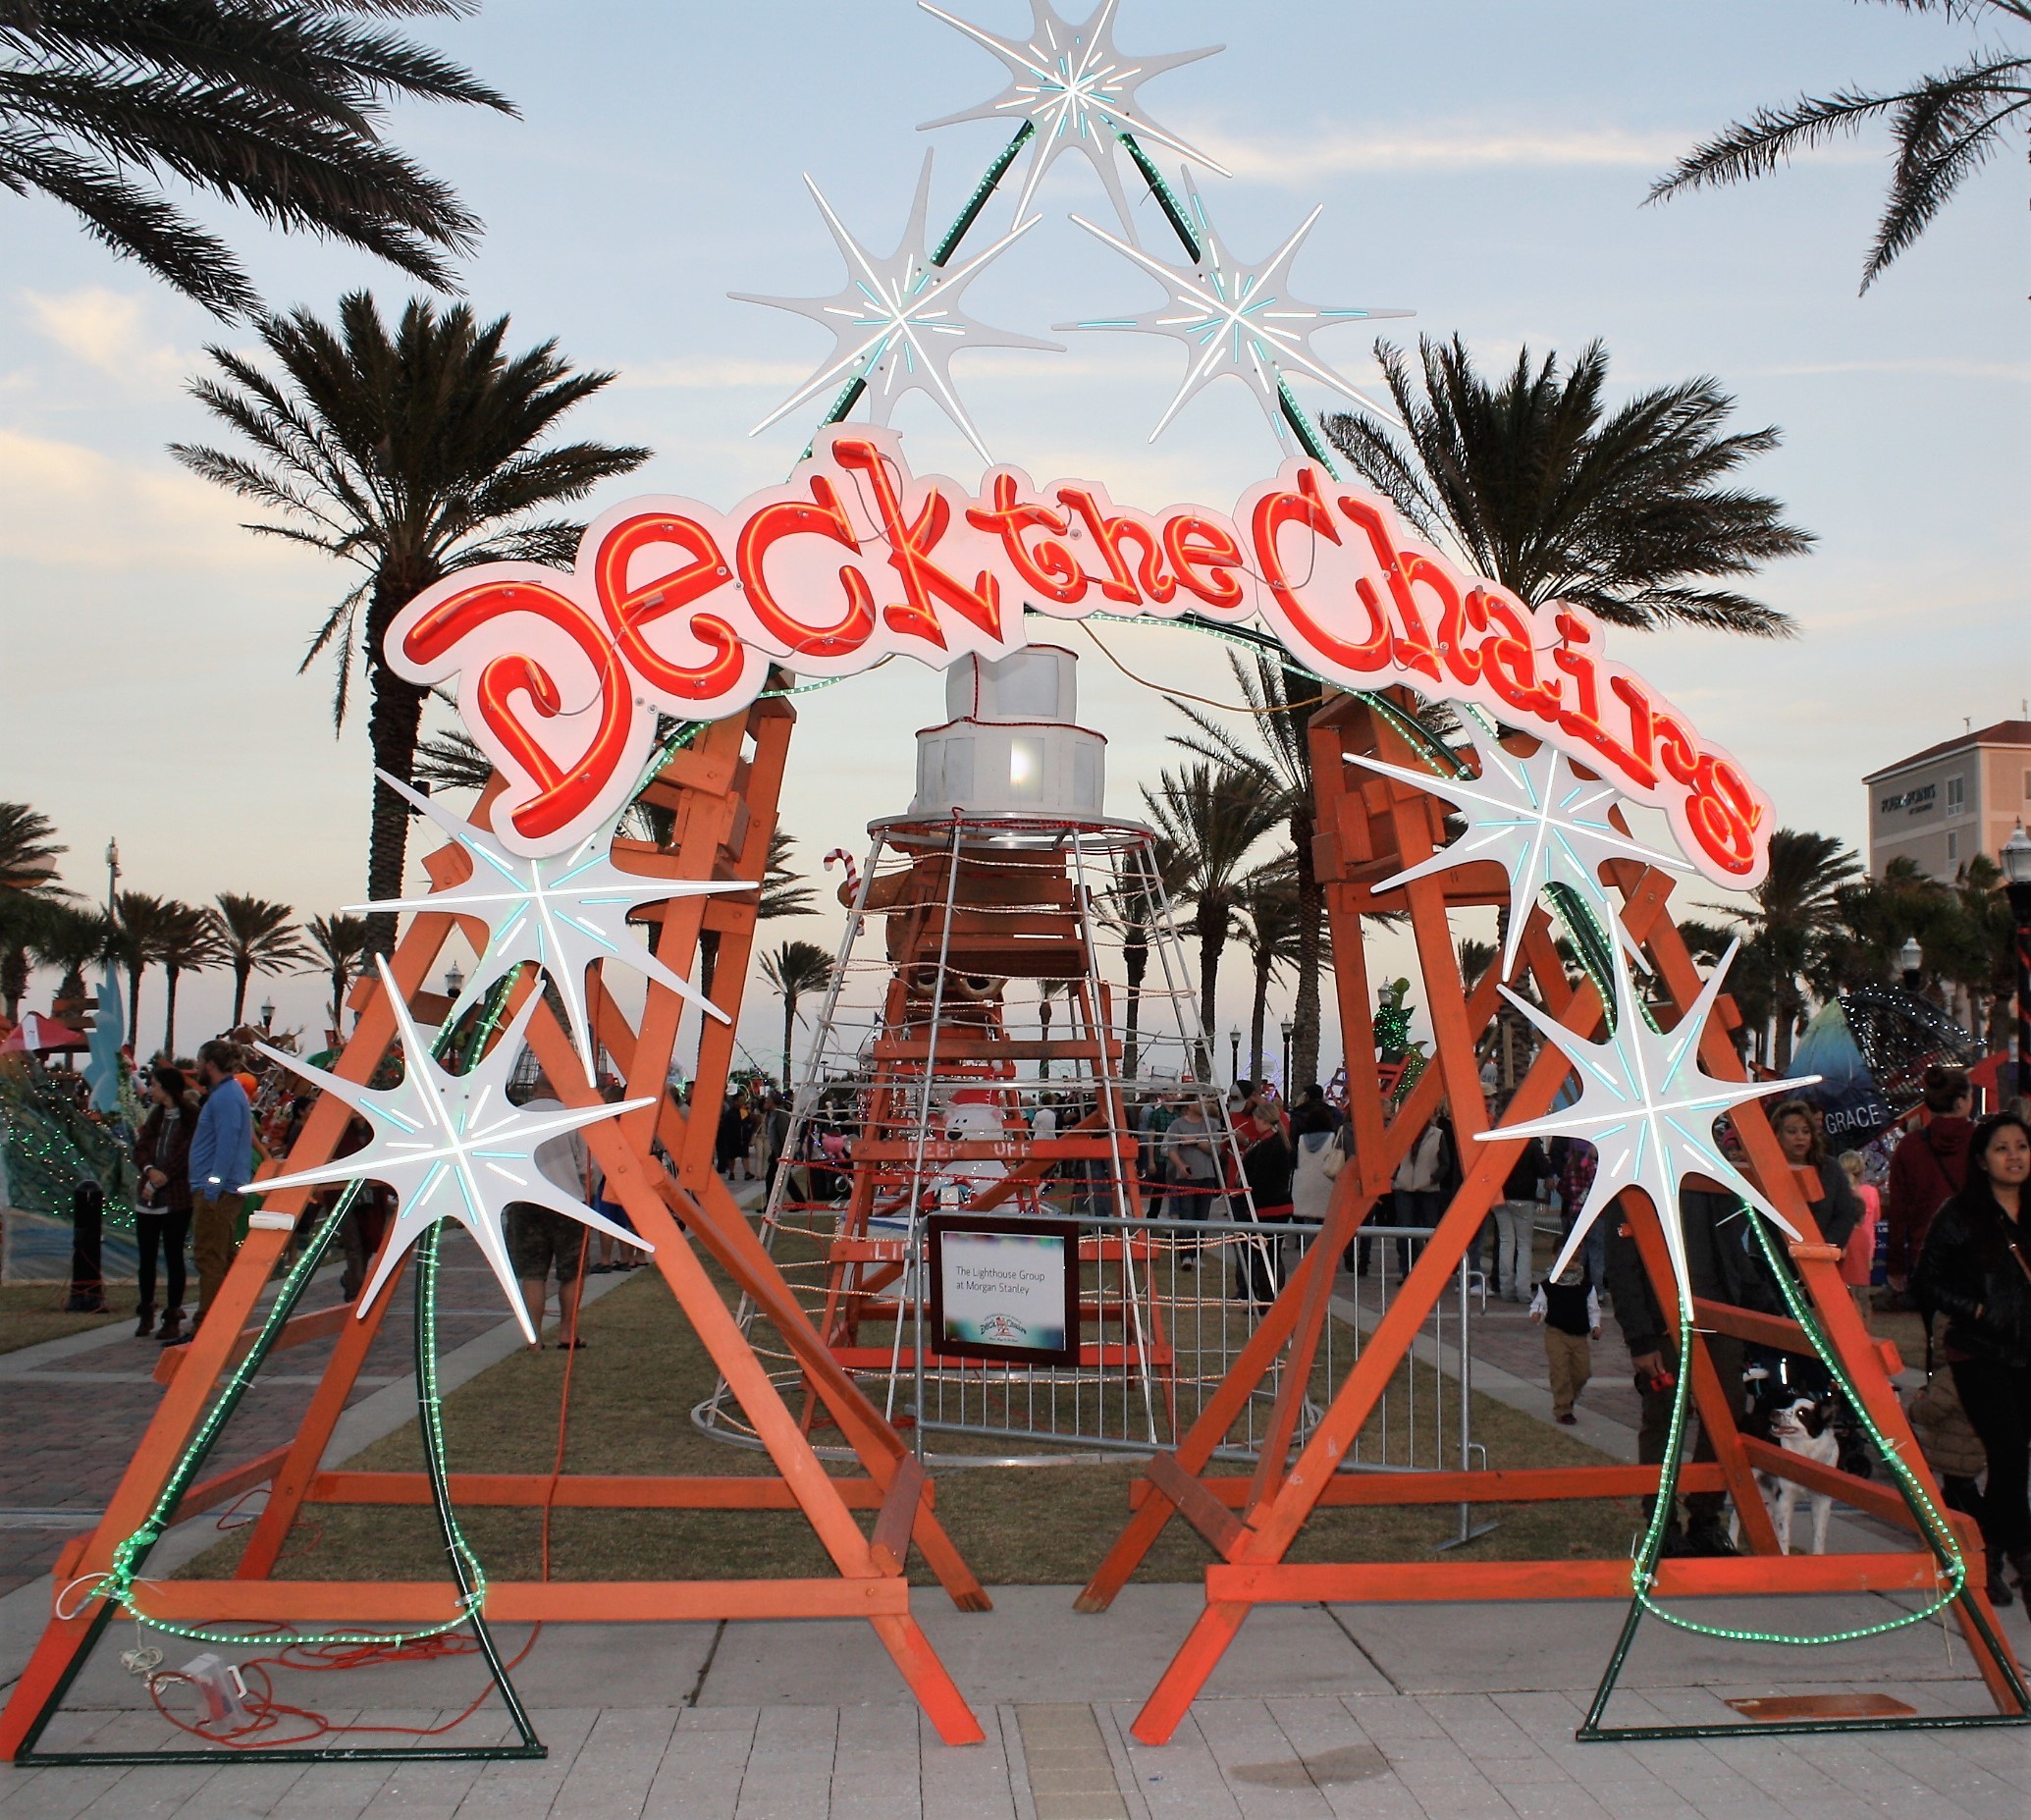 The Beaches holiday season got off to a festive start Nov. 27, when the Light the Beach celebration kicked off the 4th annual Deck the Chairs display in Jacksonville Beach.